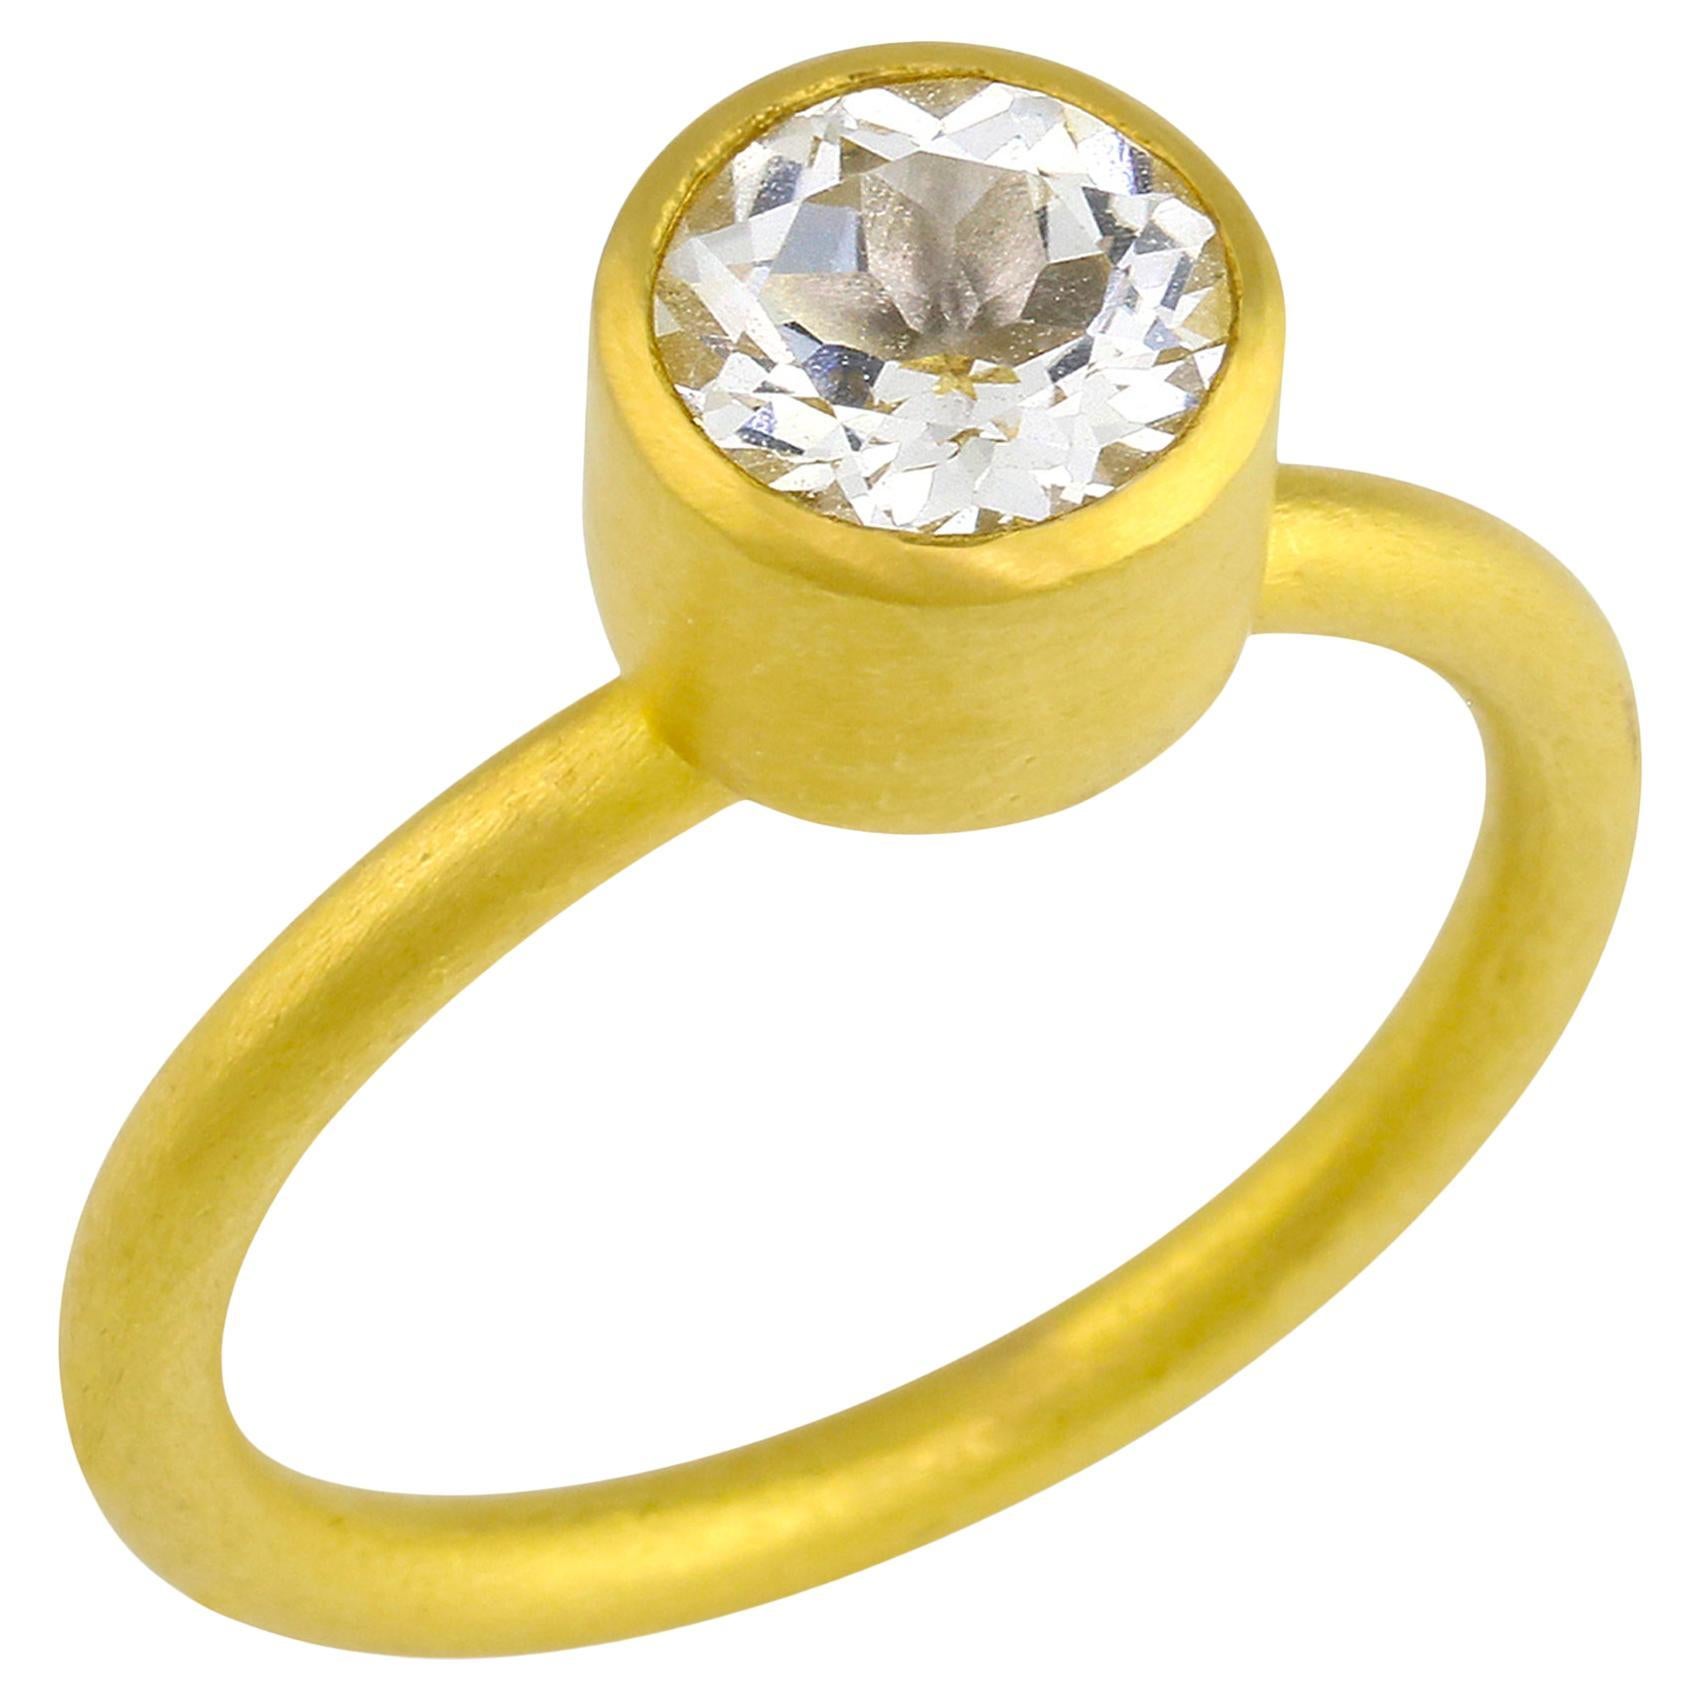 PHILIPPE SPENCER 1.6 Ct. Clear Topaz in 22K and 20K Gold Solitaire Ring